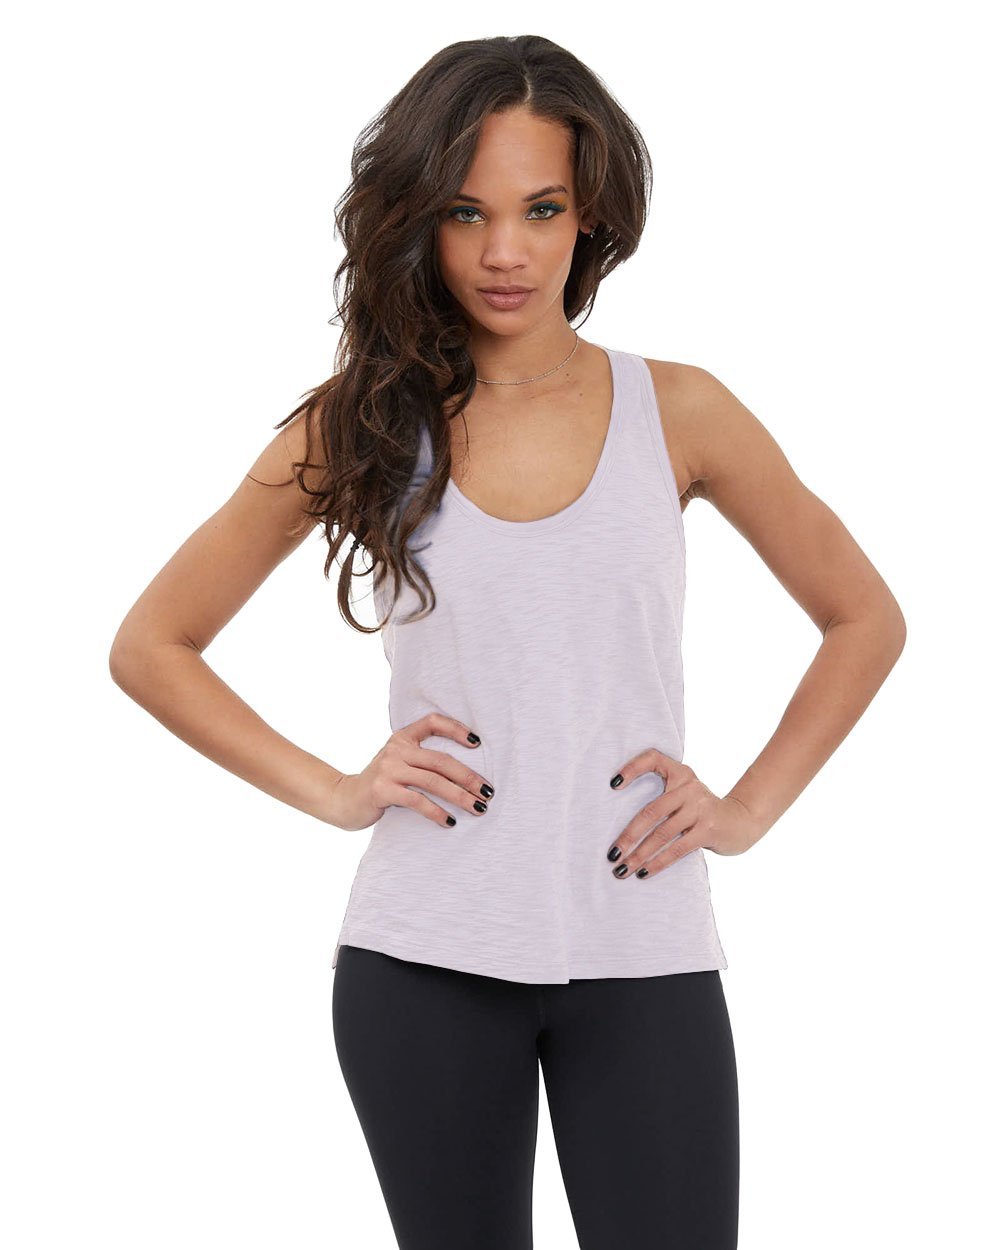 All natural & Simply Thick' Women's Performance Racerback Tank Top